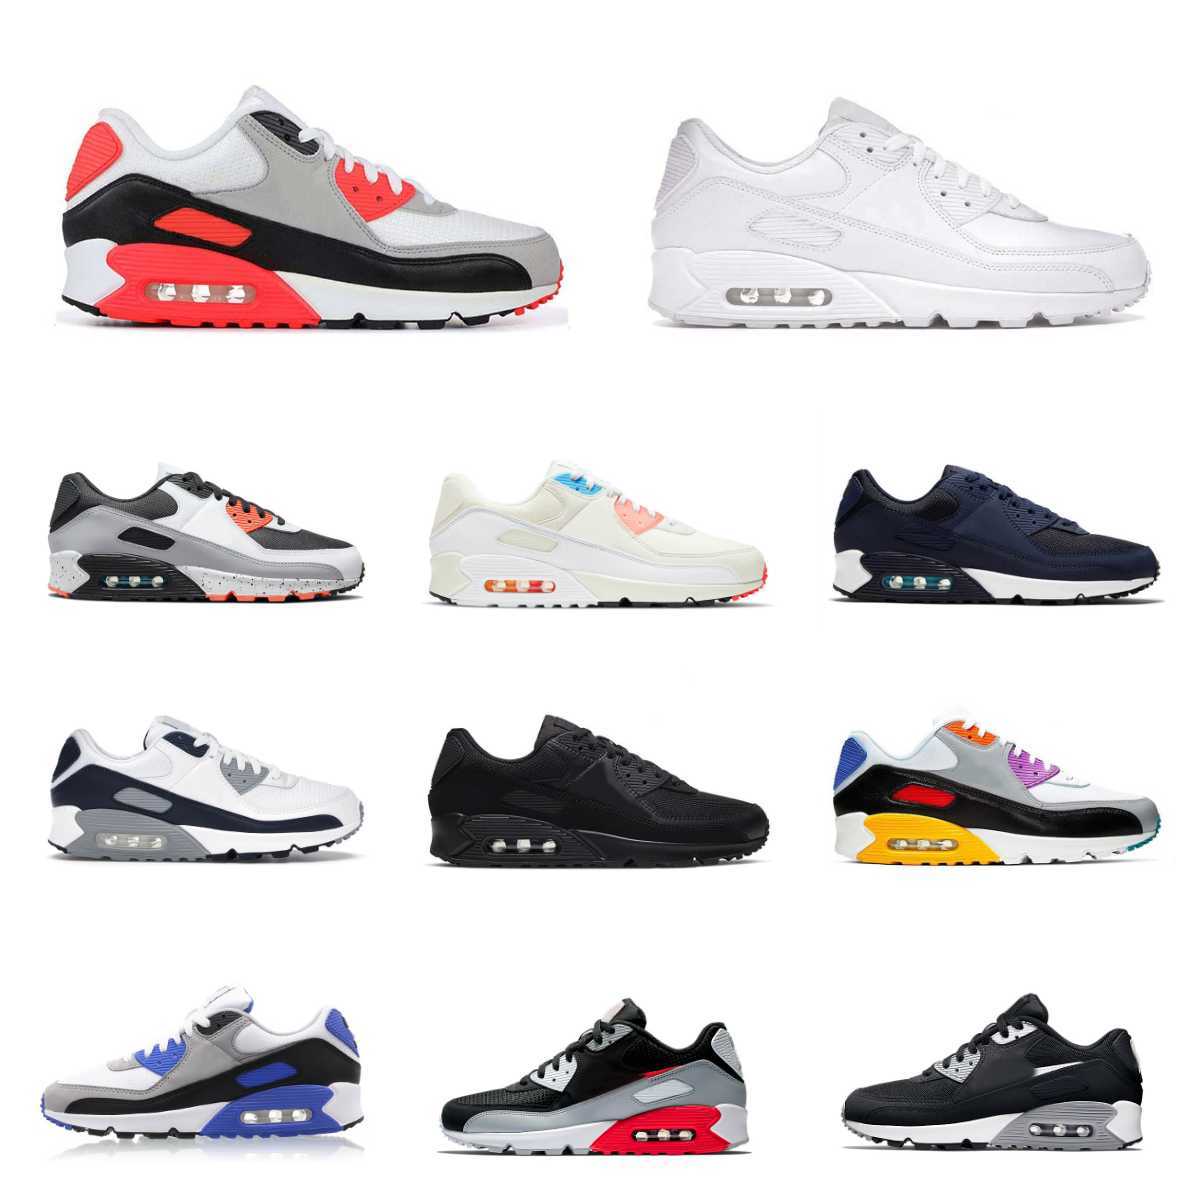 

Trainer Men 90 Sports Shoes Triple White Black Red 90S Wolf Grey Polka Dot Infrared AirMAXS Total Orange Laser Blue Airs Hyper Grape Royal Designer Women Sneakers S68, Please contact us